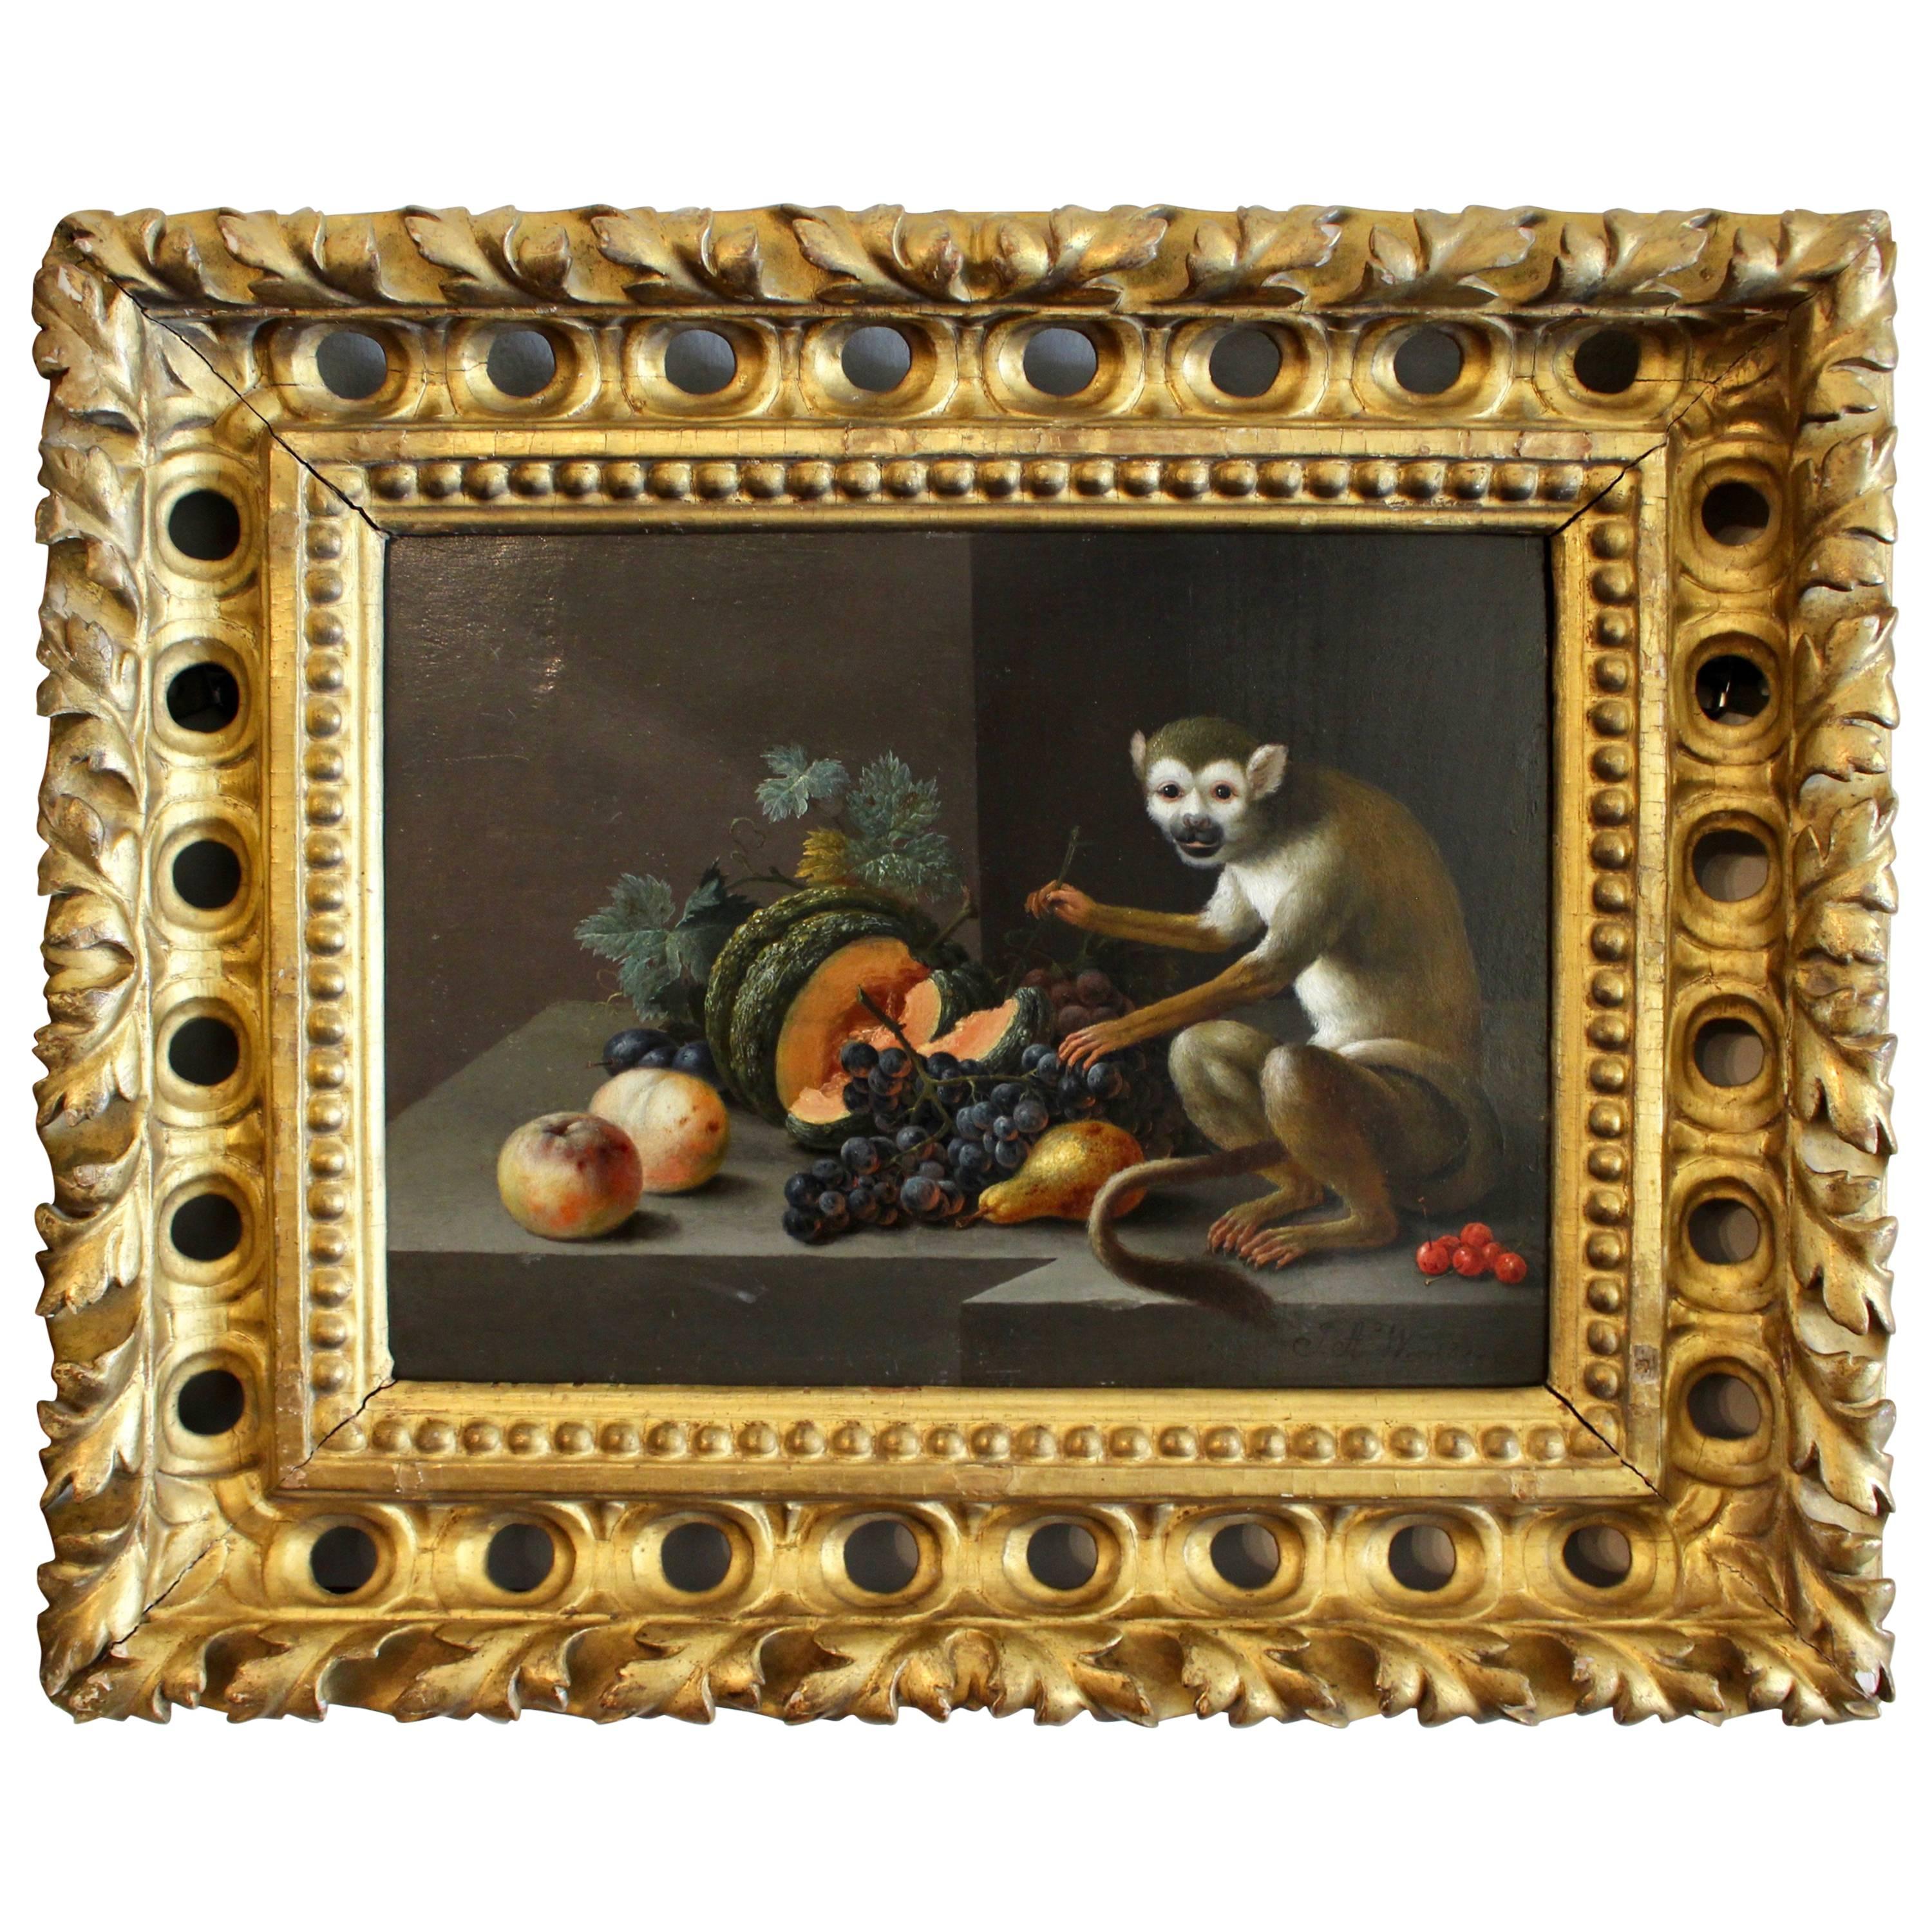 Charming Image in Still Life Fashion of a Monkey with Various Fruit For Sale